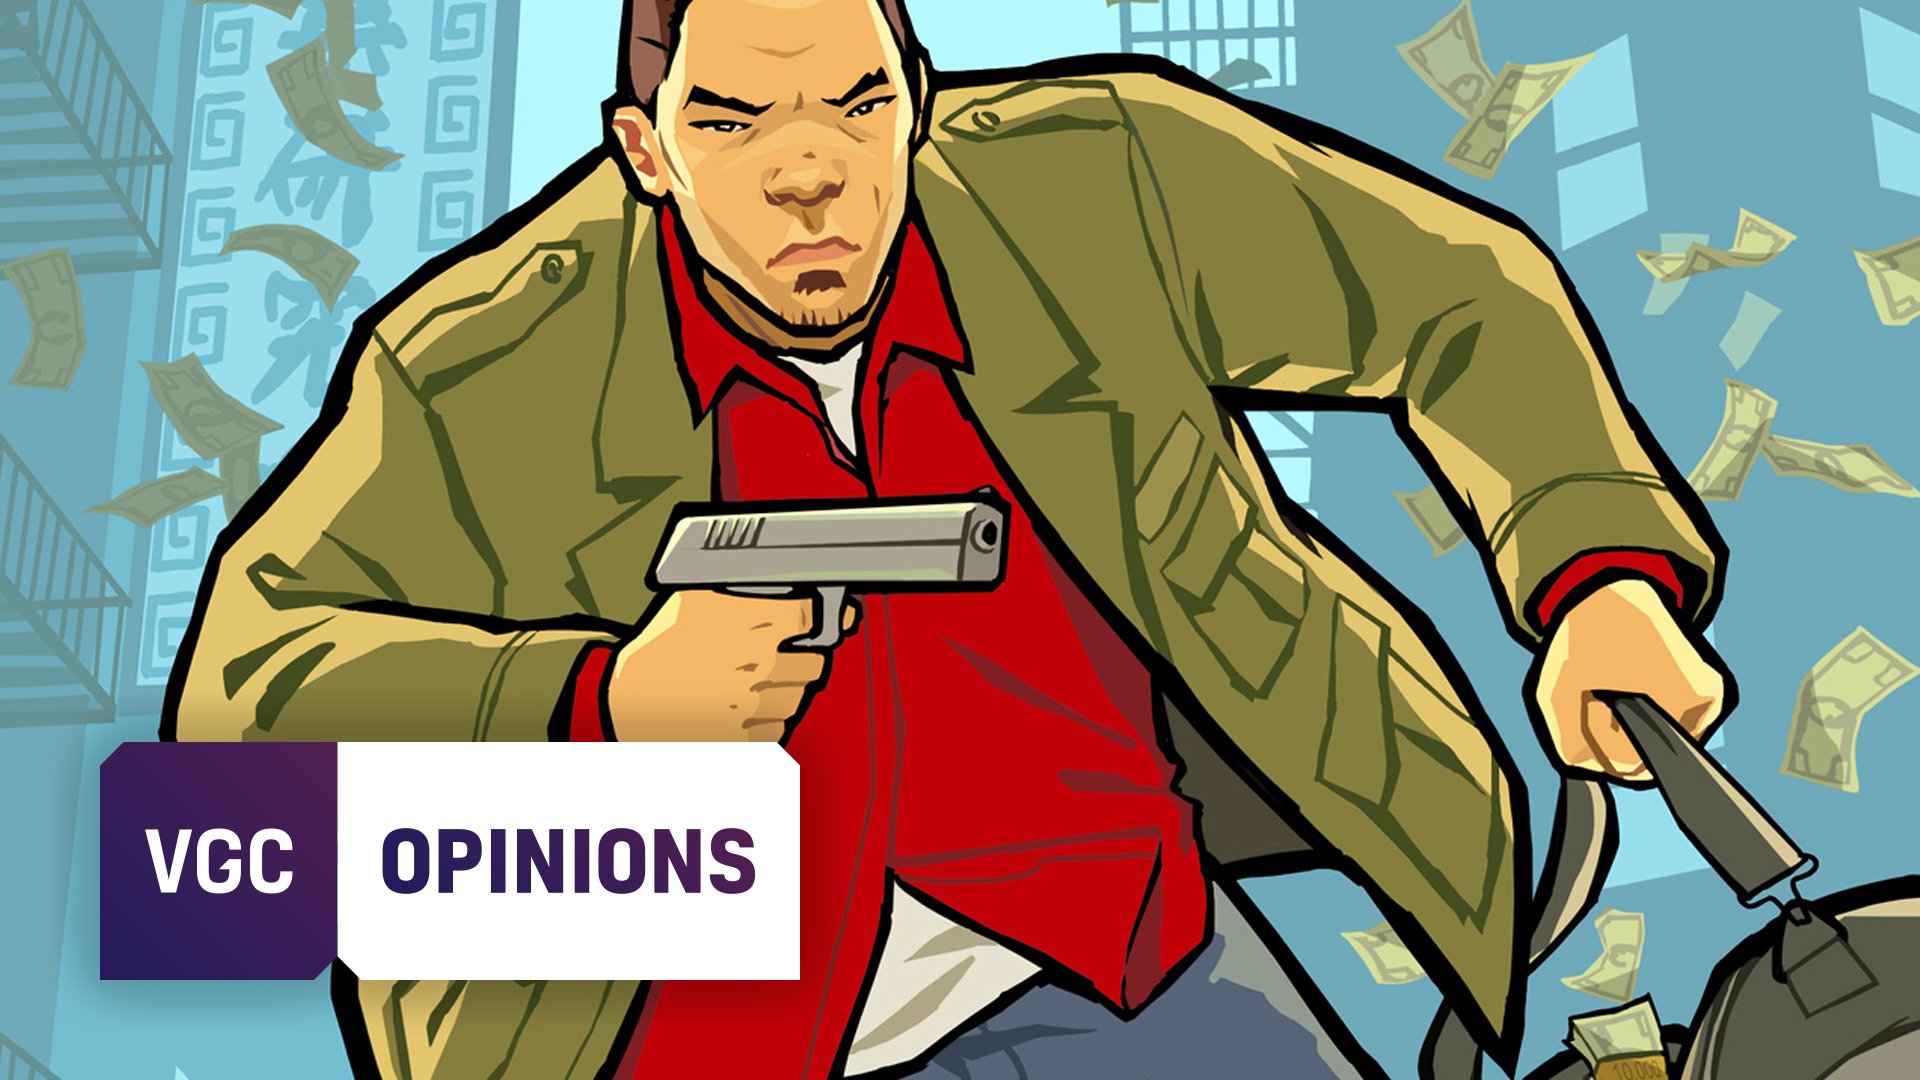 5 GTA Liberty City Stories characters that deserve a comeback